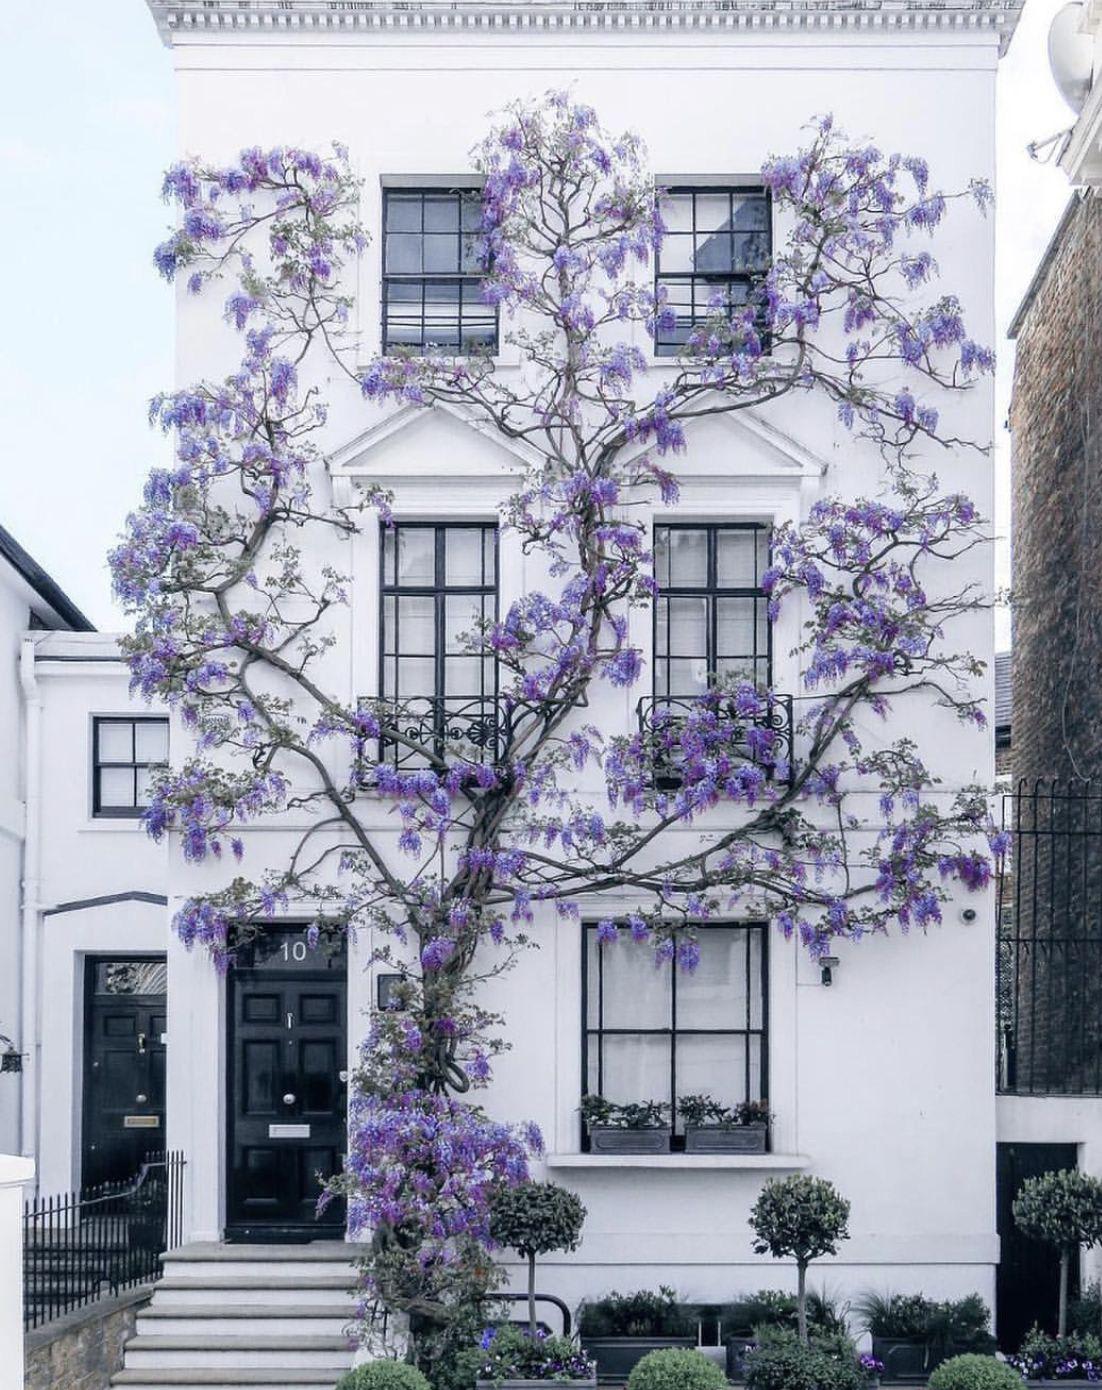 I want to buy a wisteria and have it grow like this photo, will this cause damage to my house?